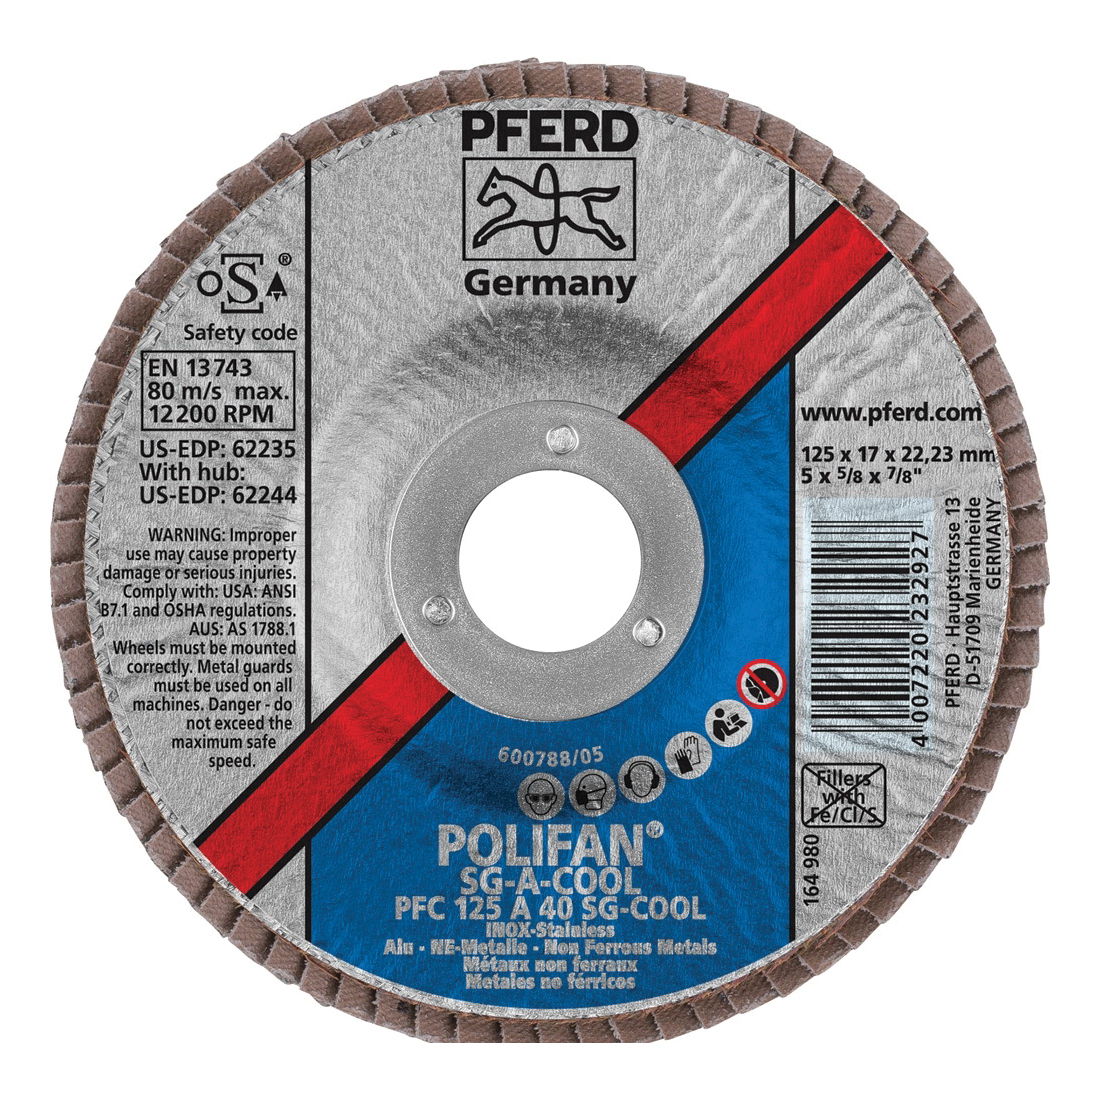 PFERD Polifan® 62235 Performance Line SG A-COOL Unthreaded Coated Abrasive Flap Disc, 5 in Dia, 7/8 in Center Hole, 40 Grit, Aluminum Oxide Abrasive, Type 29 Conical Disc